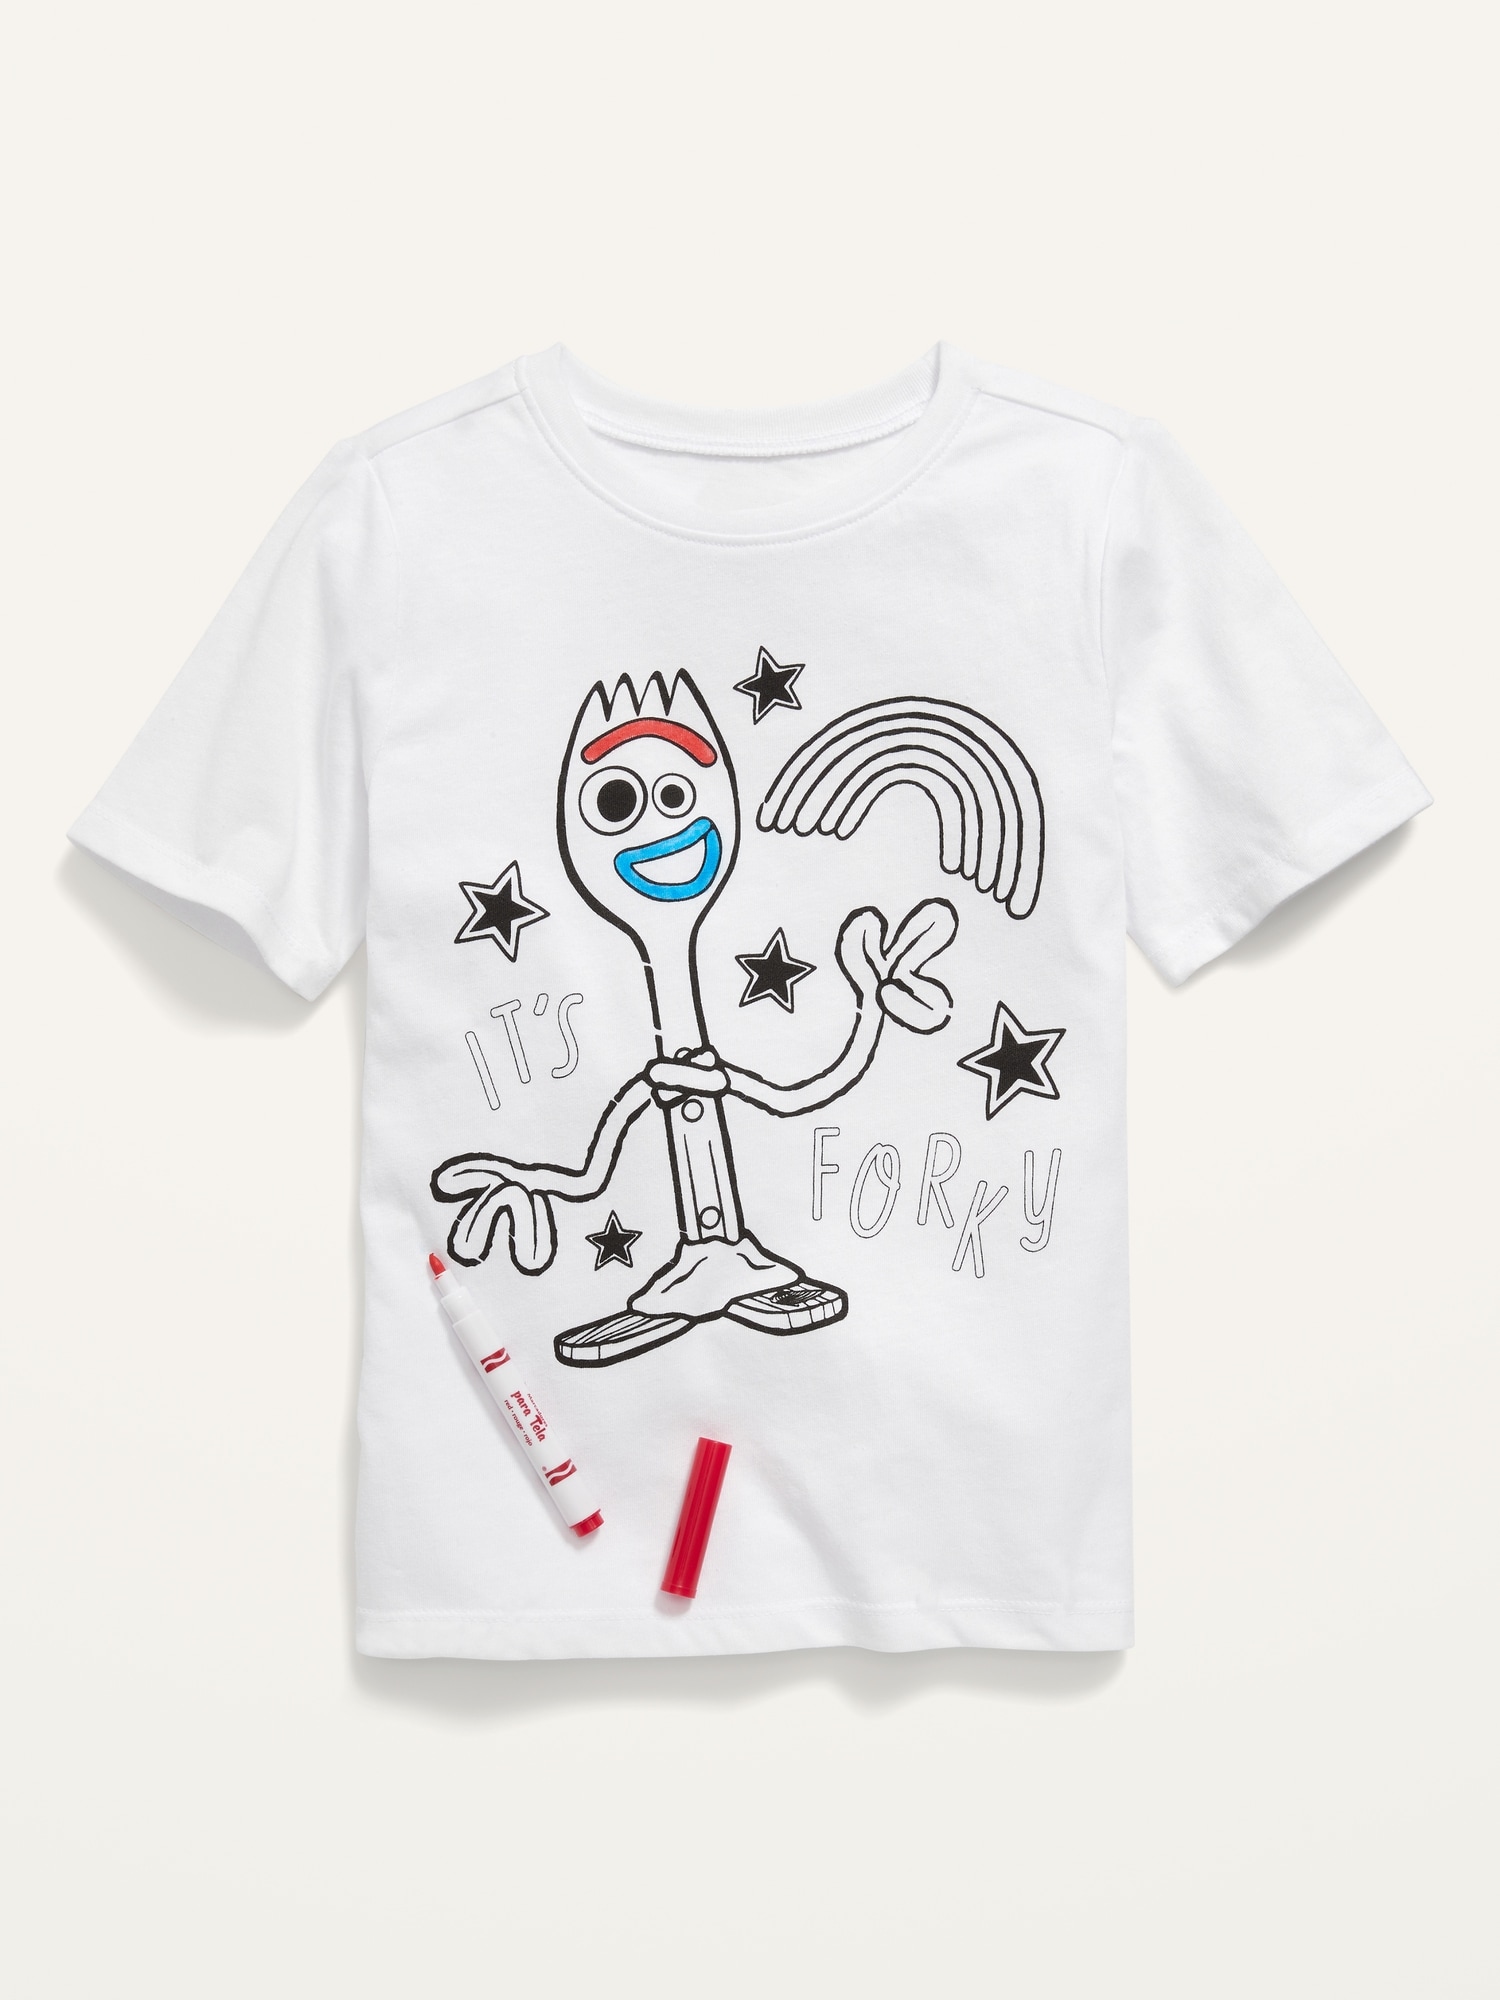 COLOUR IN T SHIRTS CHILDRENS SIZES COLOURING FUN FOR ALL AGES FABRIC PEN COLOURS 